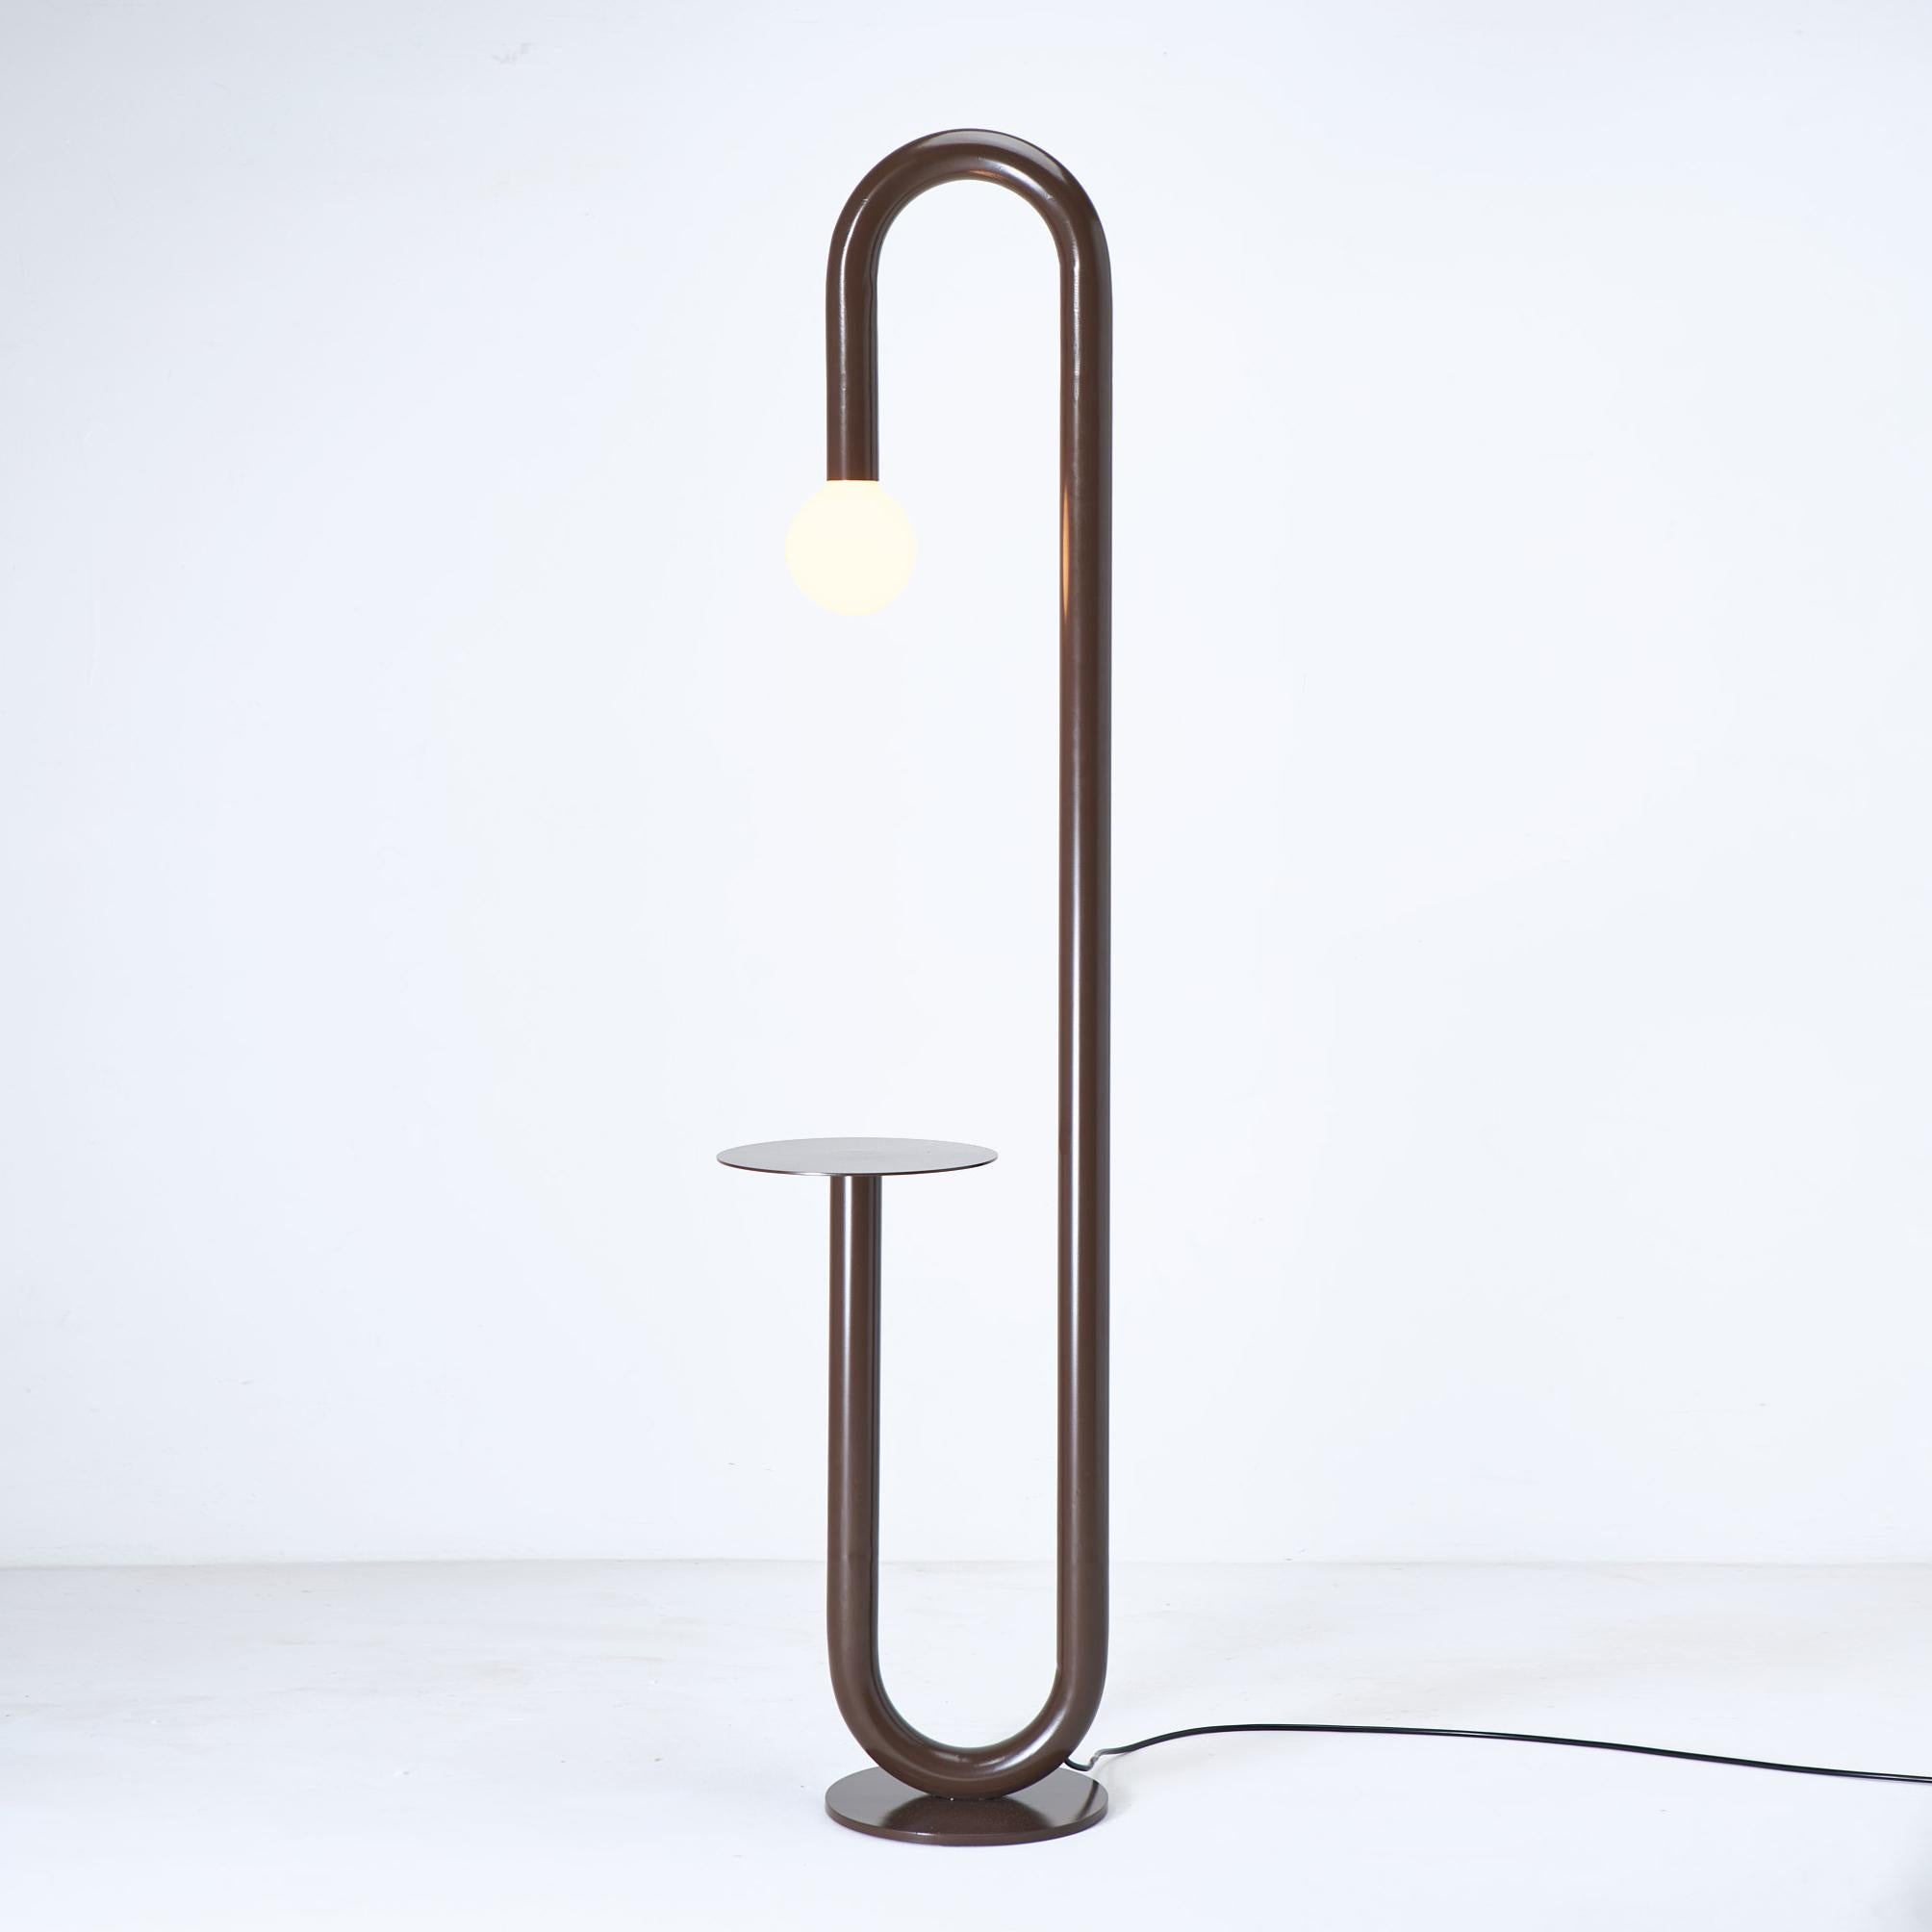 Curva floor lamp by Cultivado Em Casa
Dimensions: 27 x 38 x 160 cm 
Materials: Steel

A common item in steel houses, the 180º curve is the starting point for the development of the collection. Using this element of industrial origin and organic